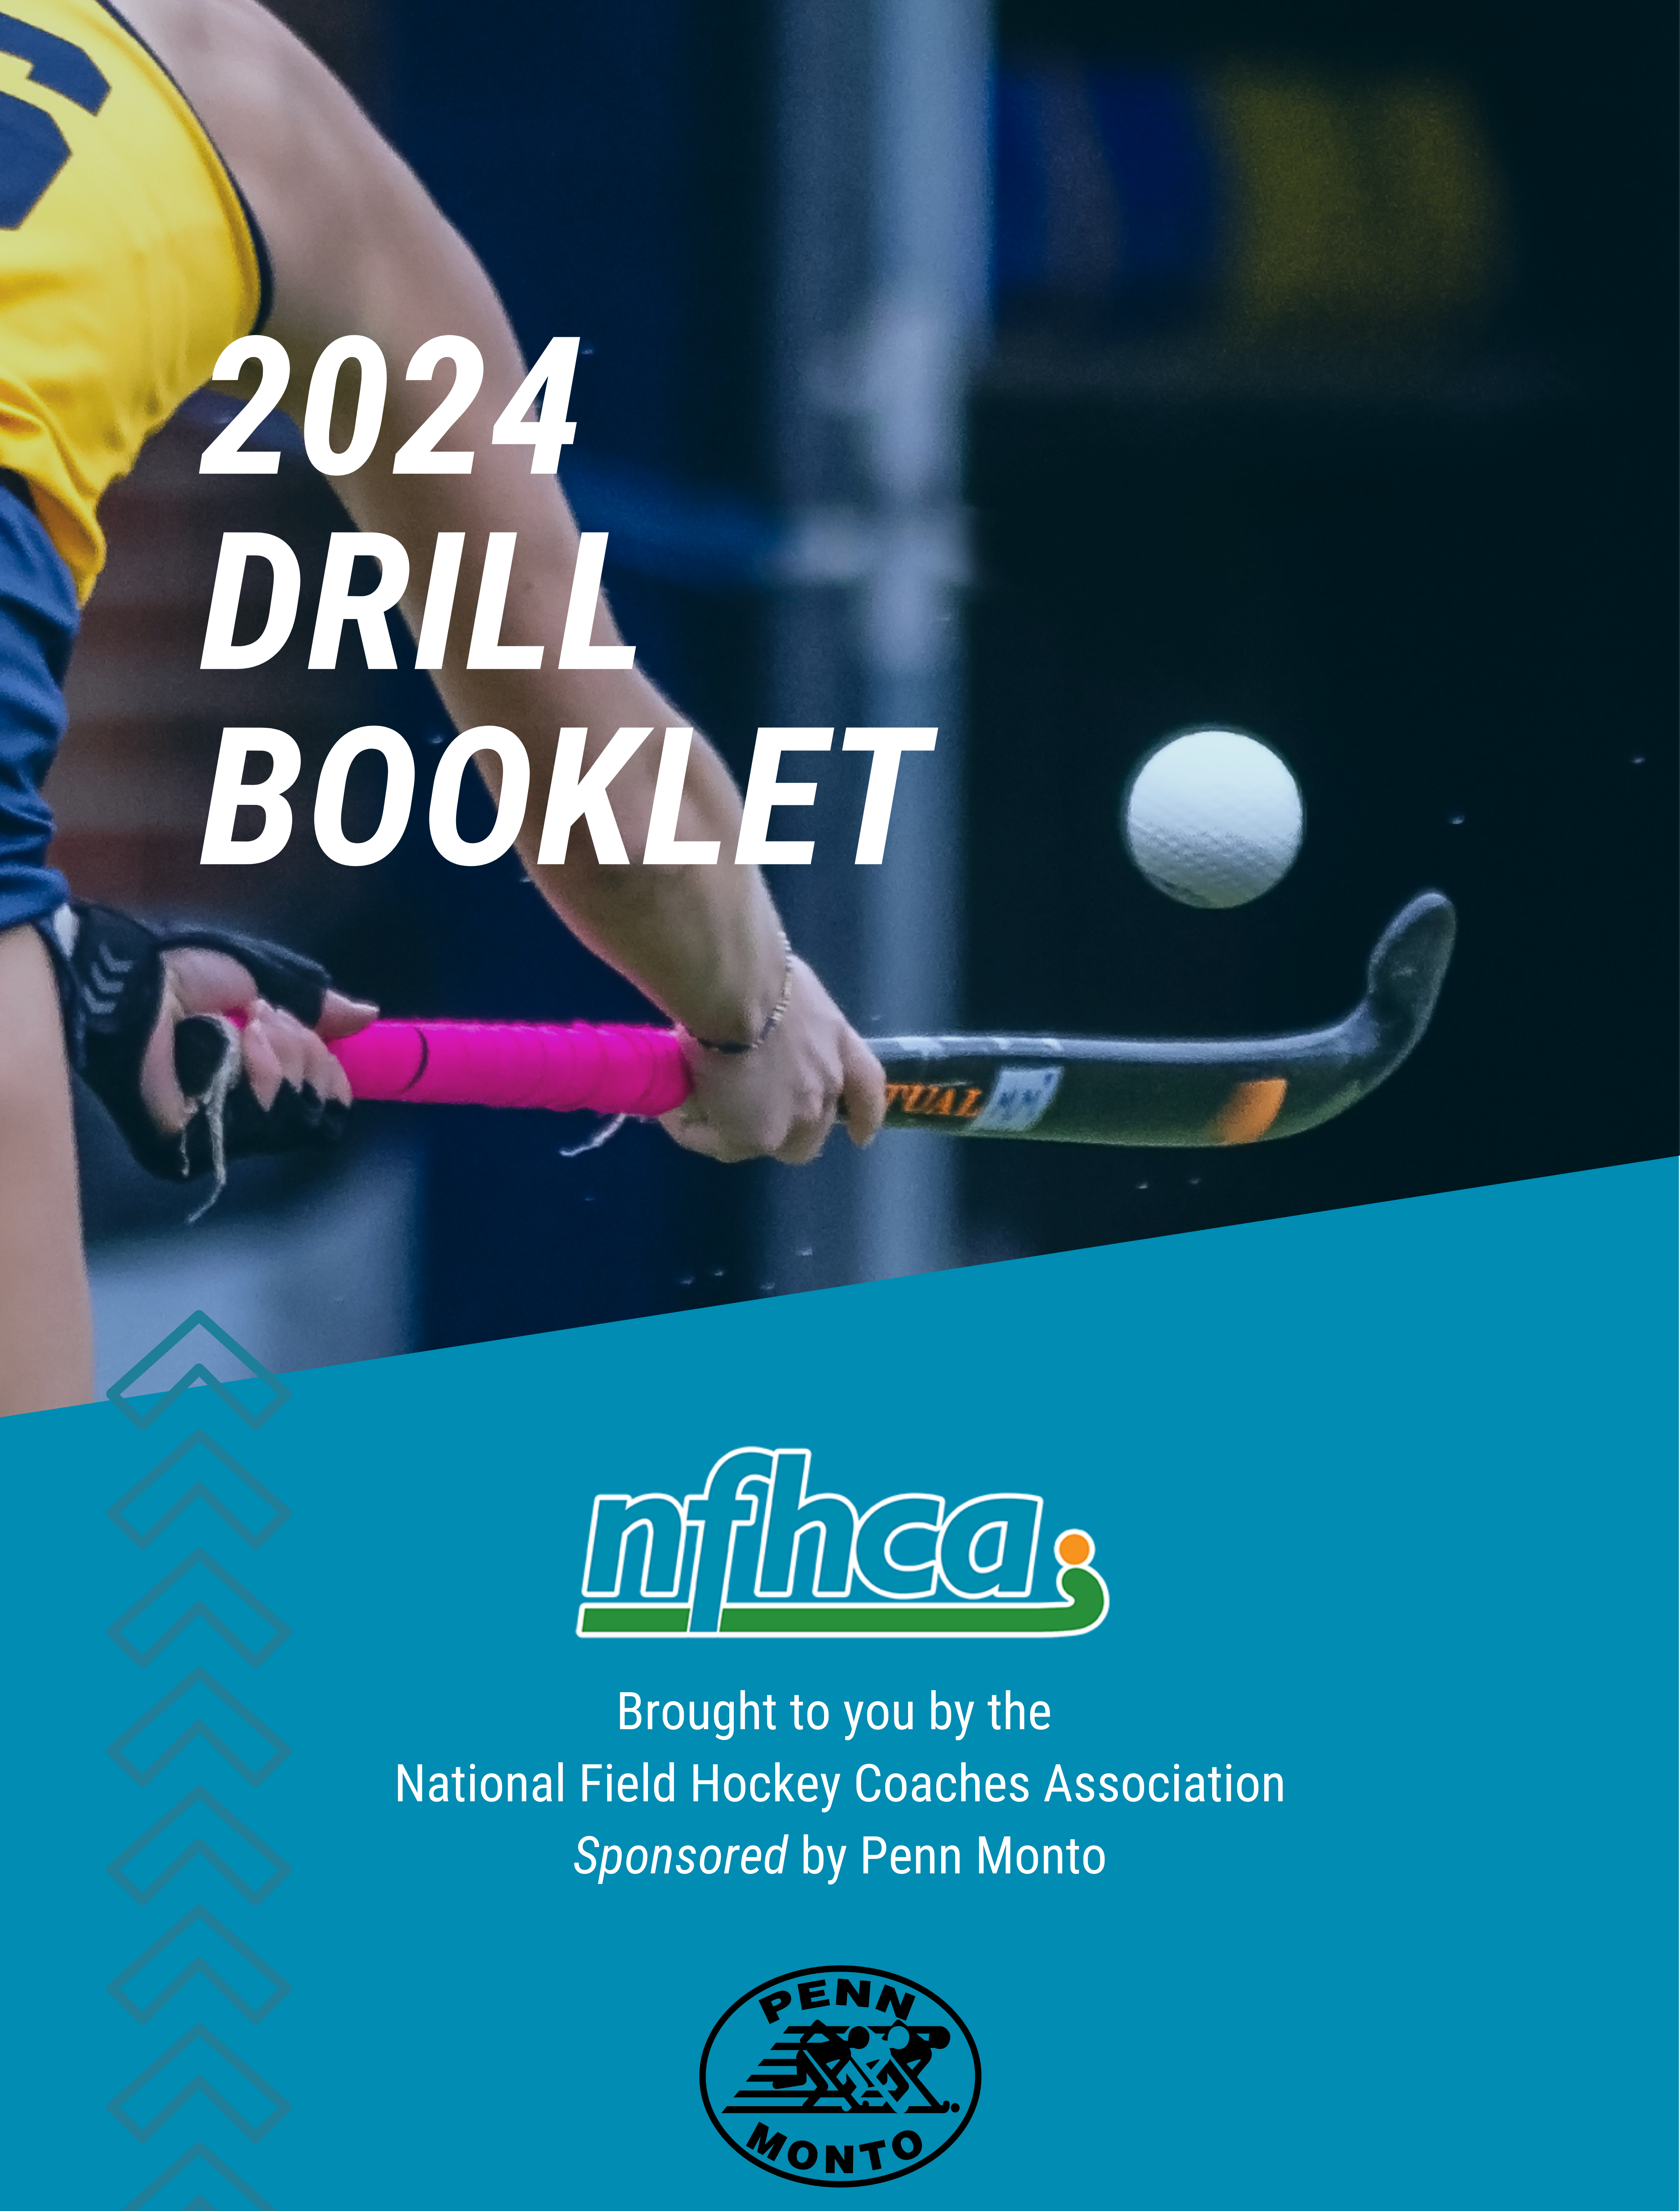 Drill Booklet Cover 2024